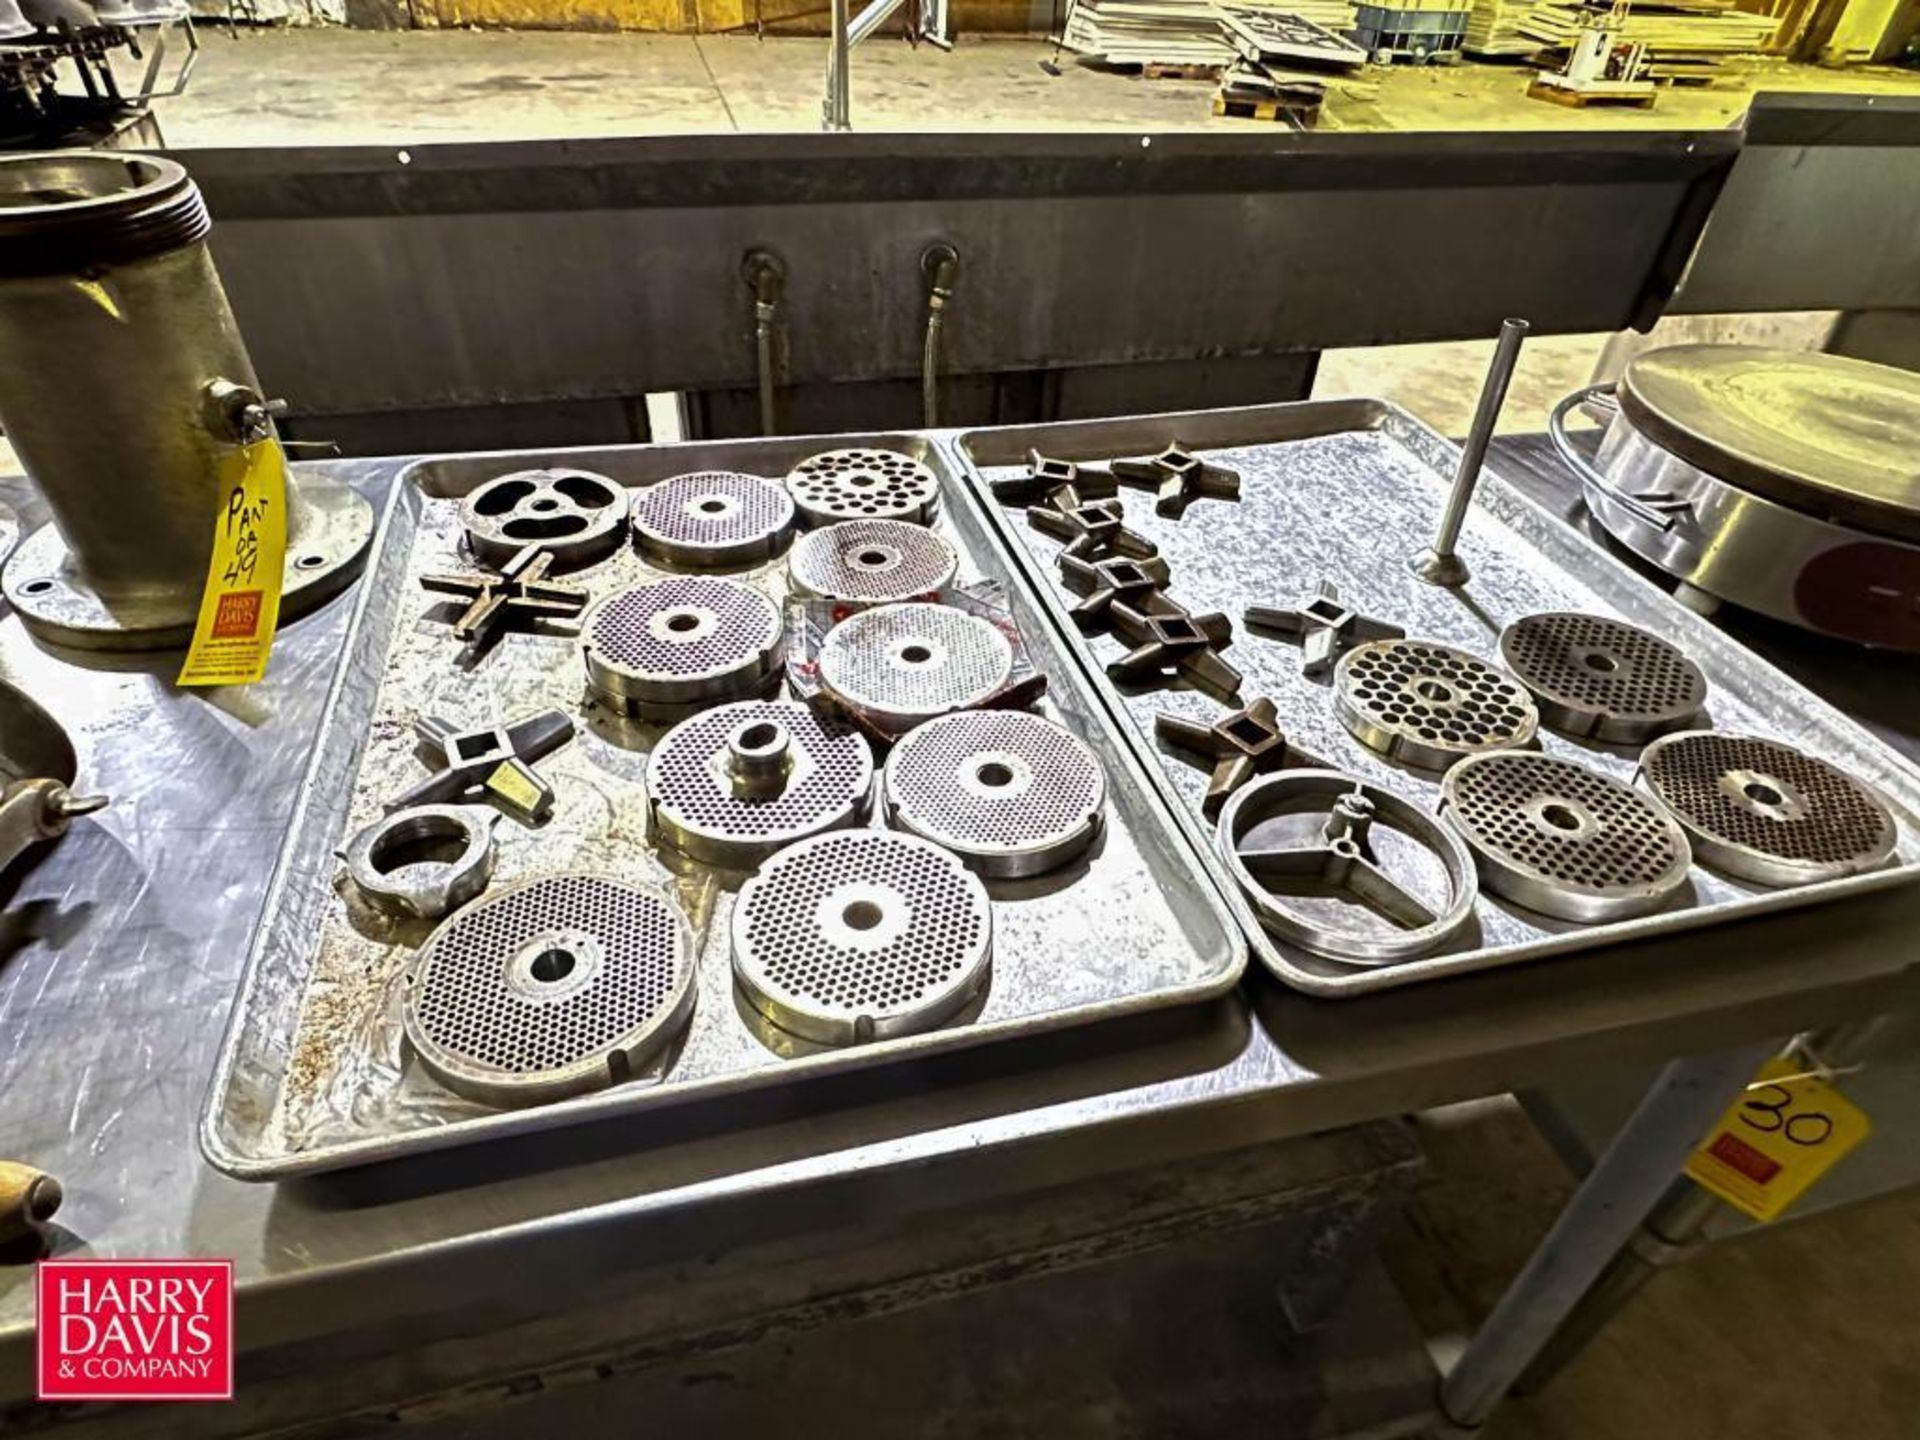 (2) Hobart and Biro S/S Grinders with Augers, Blades and Grind Plates - Rigging Fee: $300 - Image 4 of 6